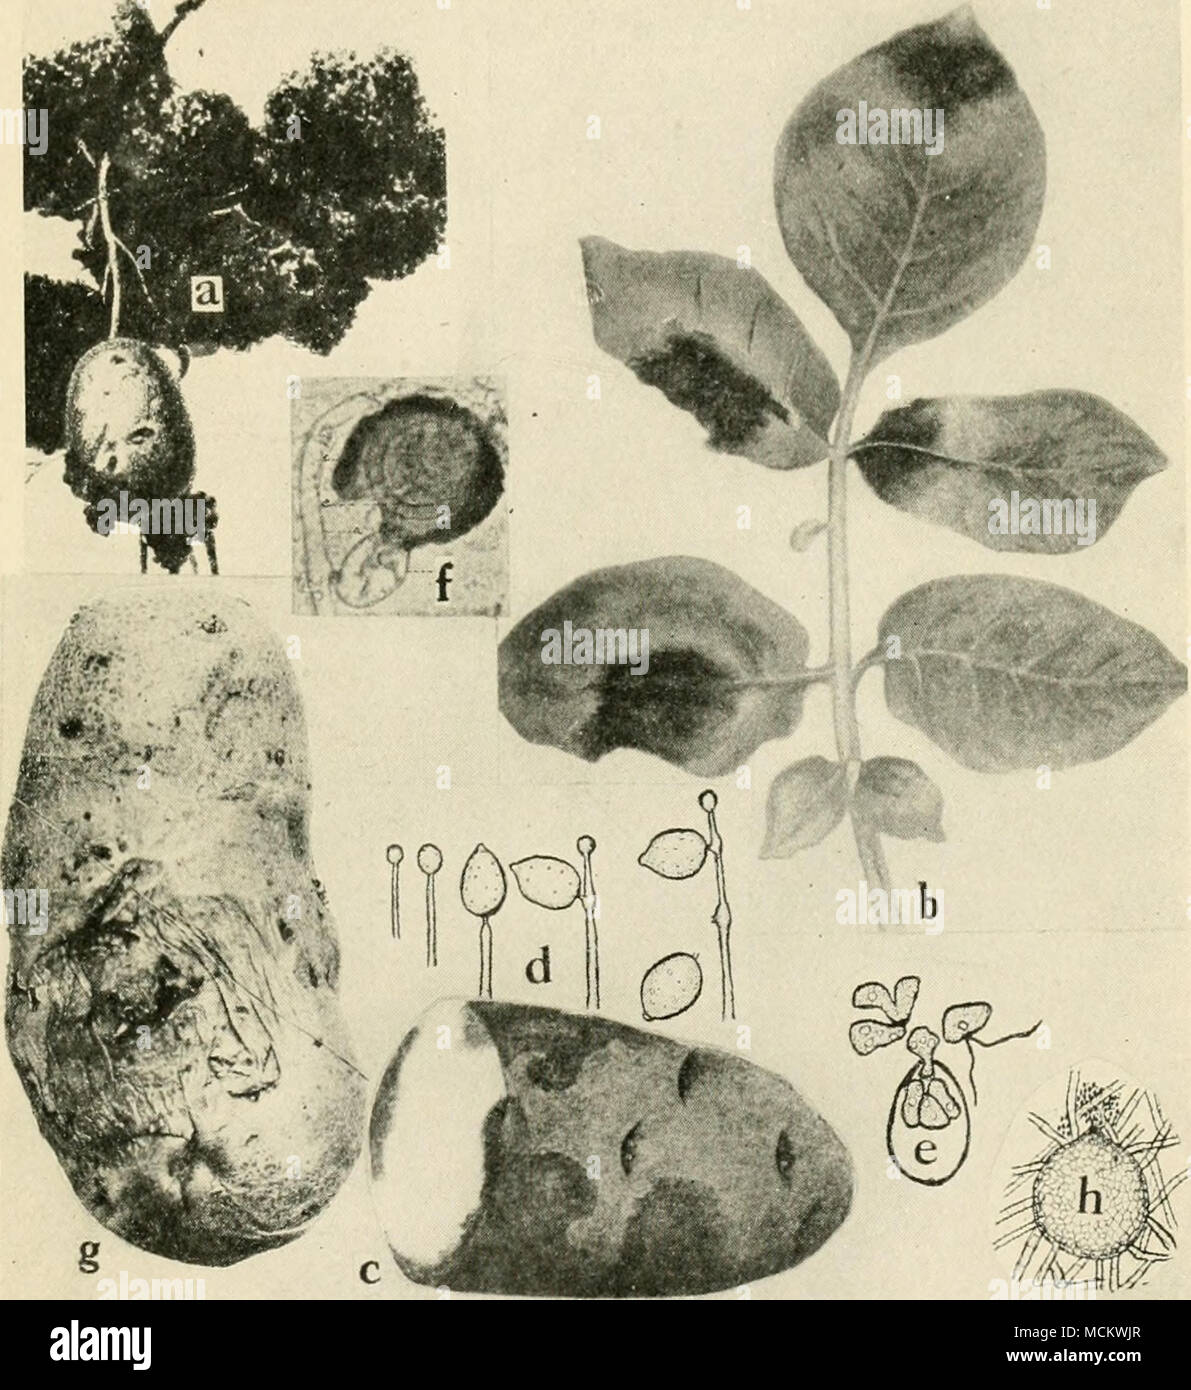 . Fig. 6i. Potato Diseases. a. Black wart (after Giissow), b. late blight on foliage, c. late blight on tuber, d. successive stages of the development of the conidia of Phyiophlhora infeslans (b. and d. after L. R. Jones), e. germination of conidia of Phytophthora infestuns, by means of zoopores (after Ward),/, mature oogonium of P. infcstans (after Clinton), g. melters, surface view, early stage of infection, h. pycnidium of Phoina titberosa (after Melhus and Rosenbaum). Stock Photo